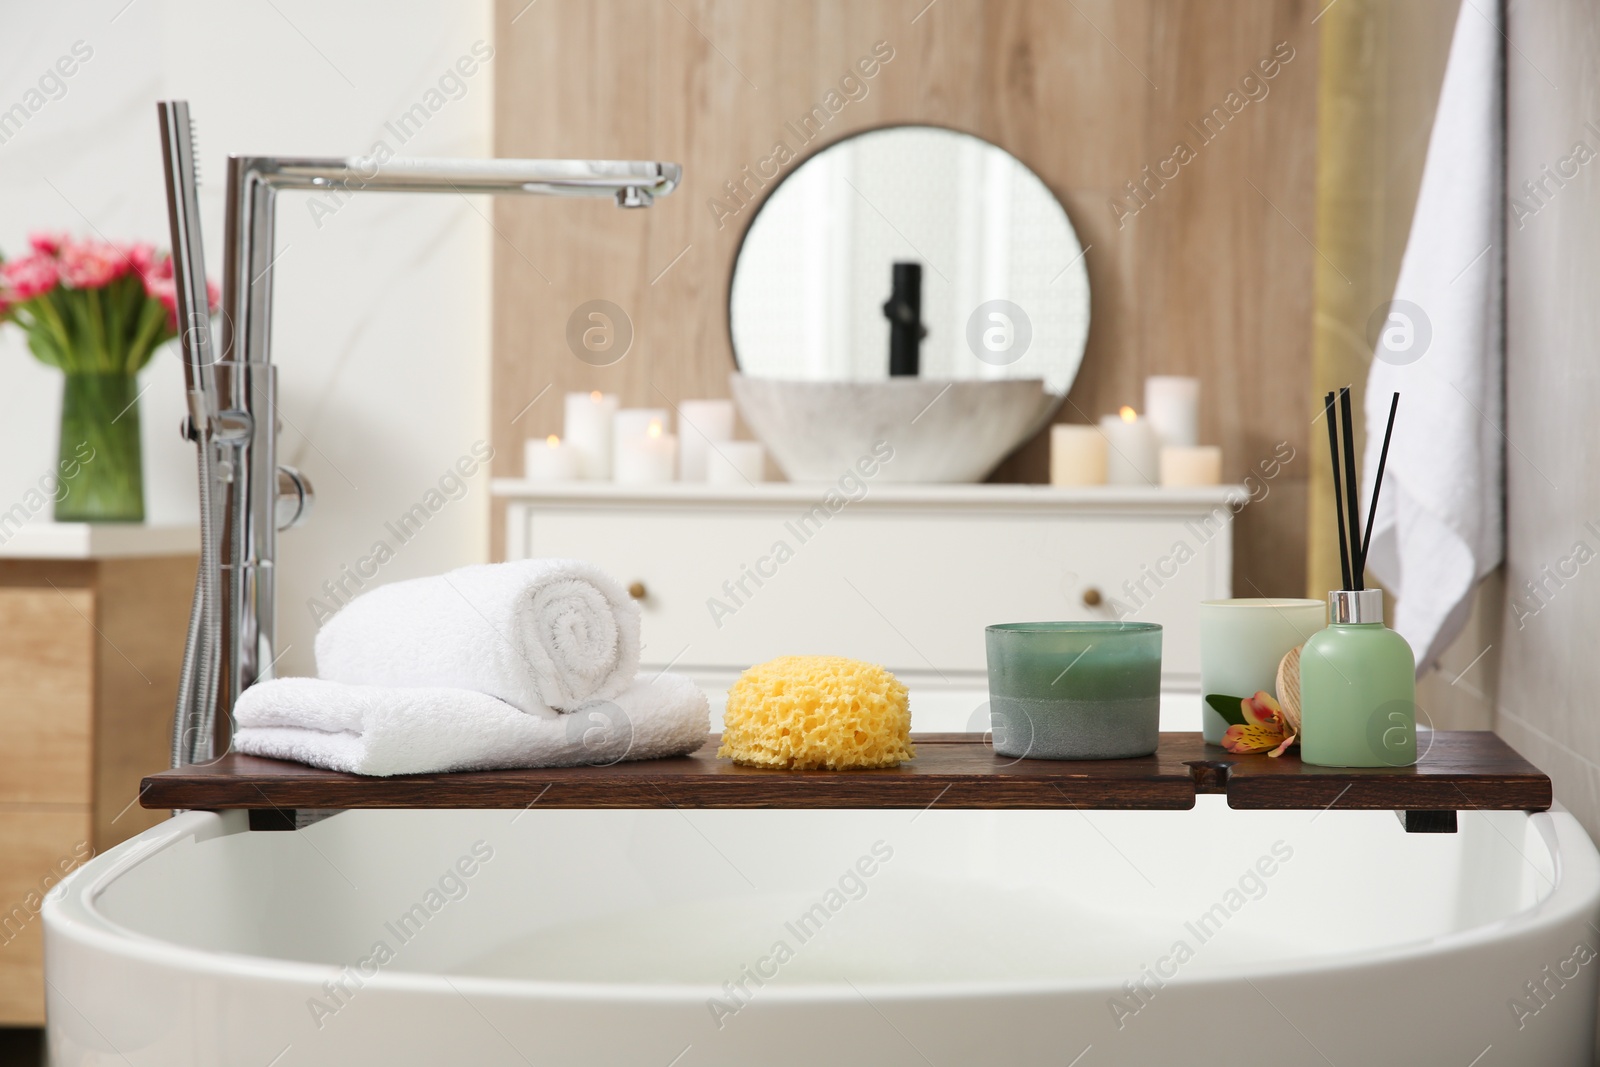 Photo of Wooden bath tray with candles, air freshener, towels and sponge on tub indoors